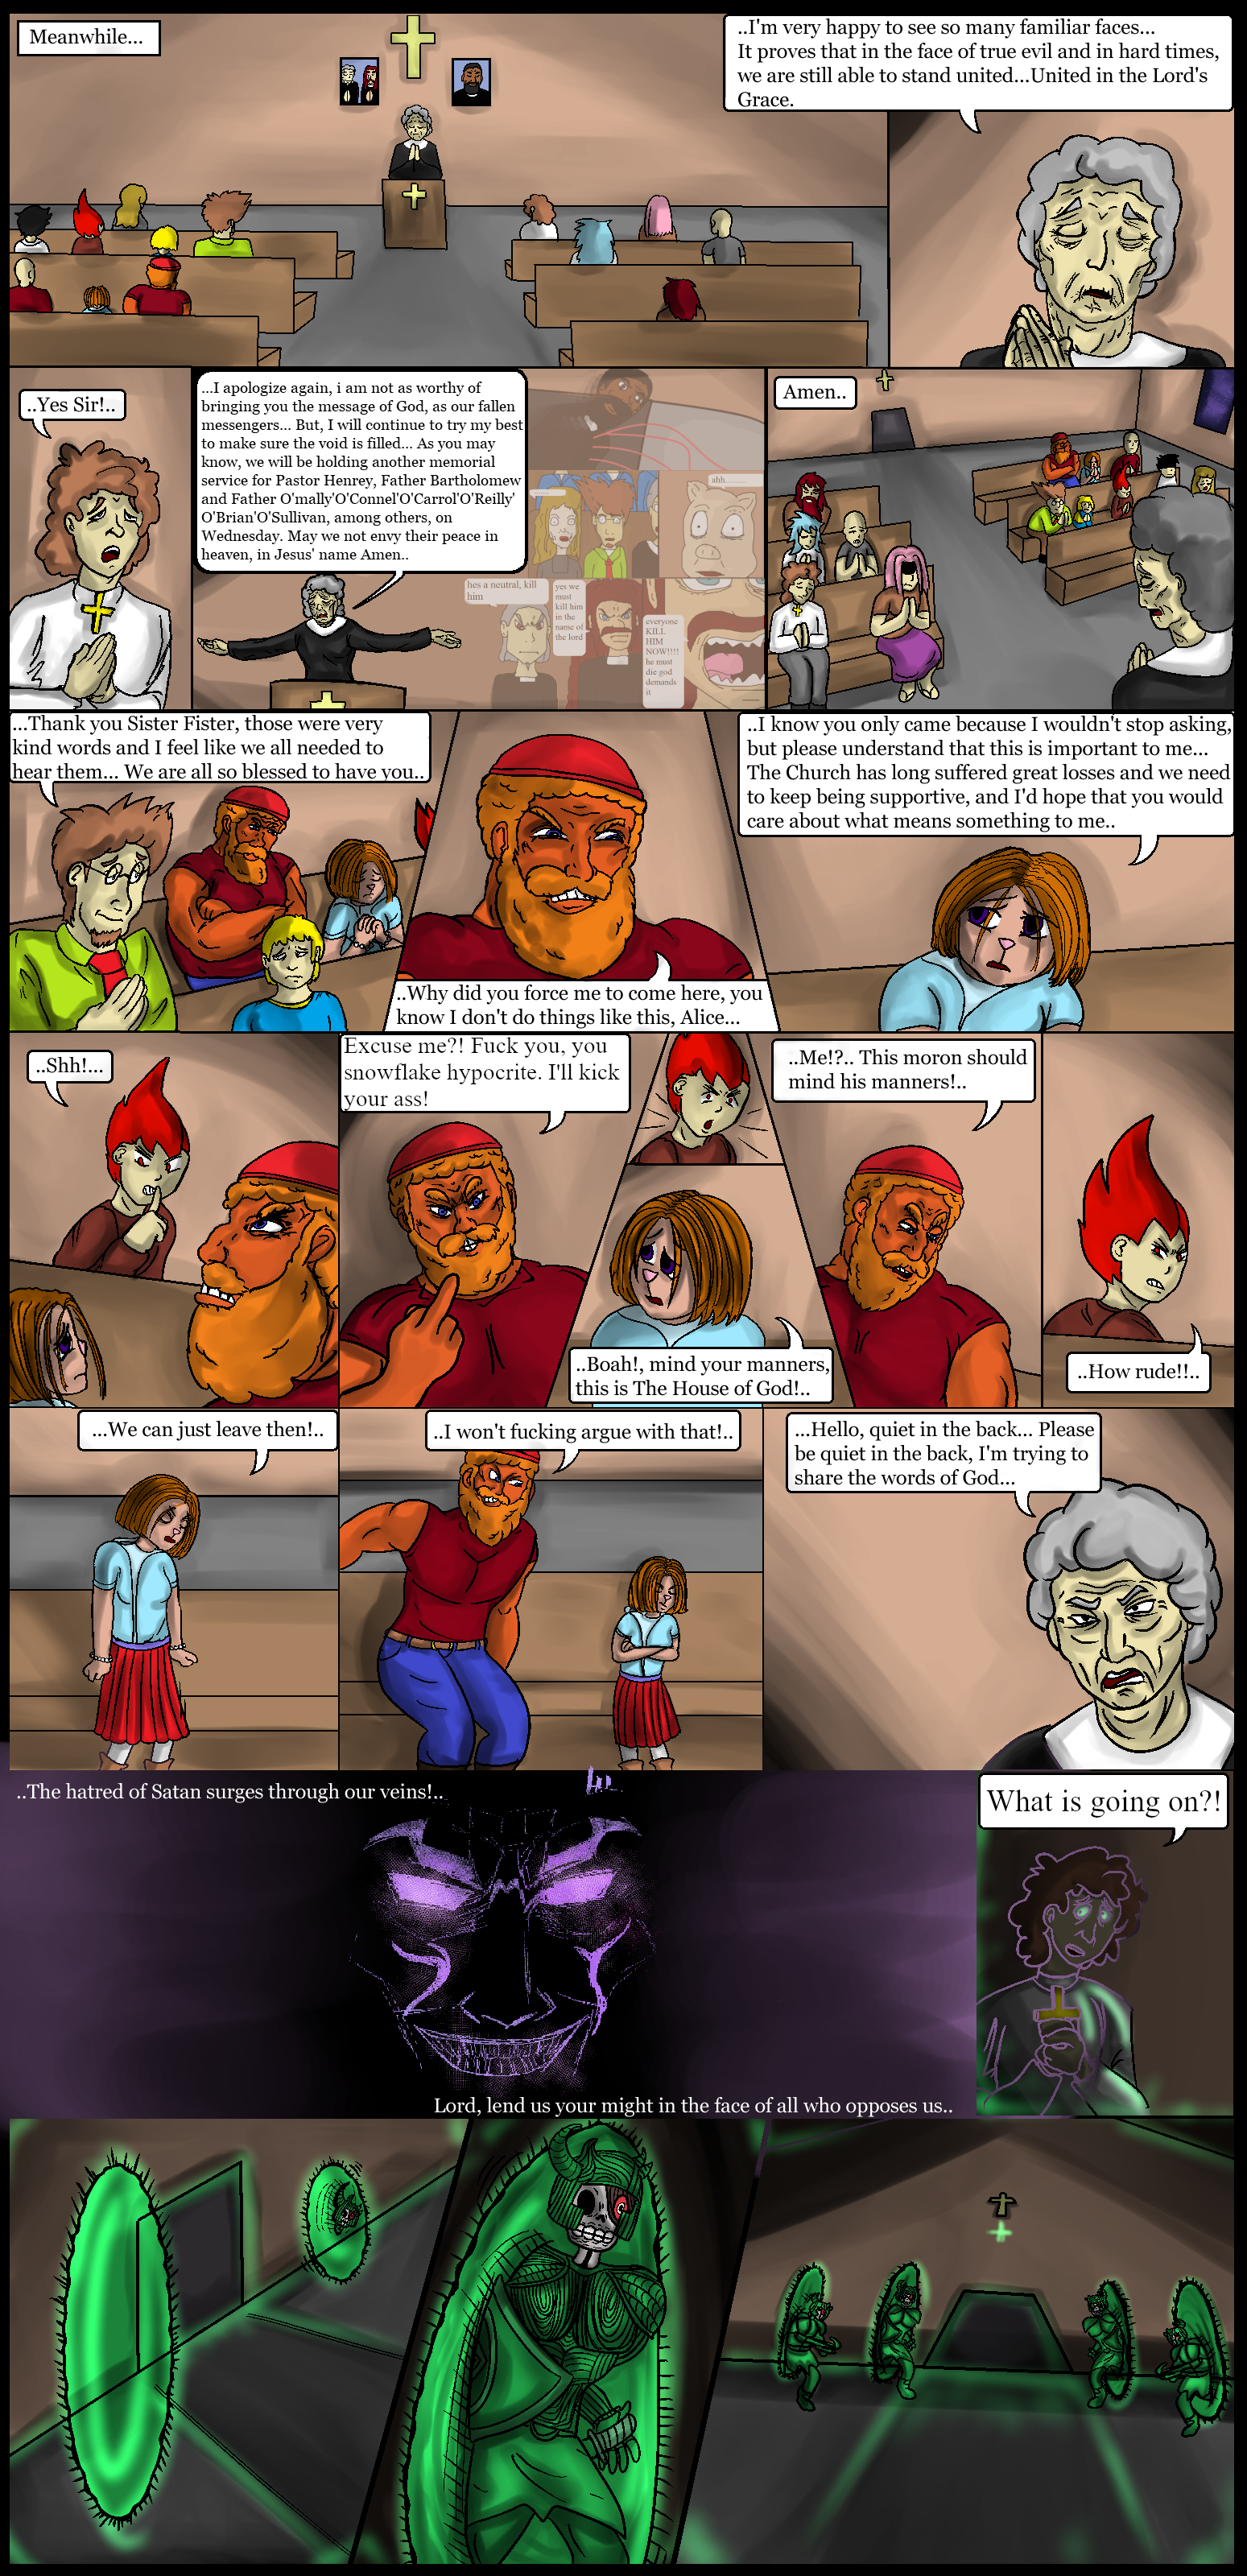 ch25.5/pg1.png. If you're seeing this, enable images. Or, perhaps we have a website issue. Try refreshing, if unsuccessful email c@commodorian.org with a detailed description of how you got here.